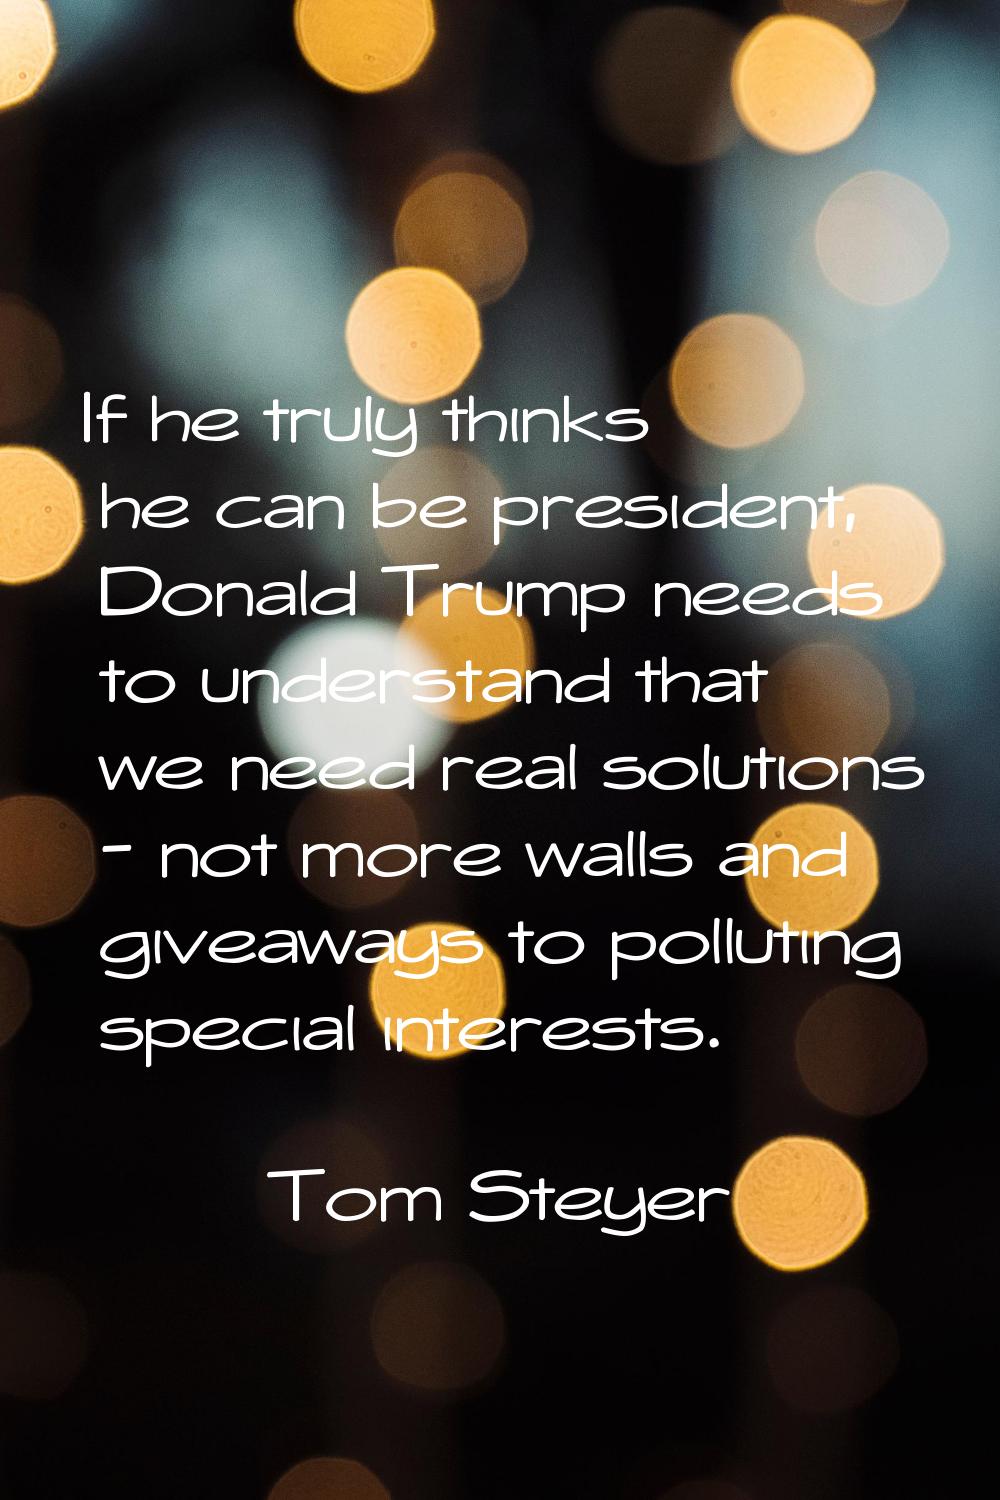 If he truly thinks he can be president, Donald Trump needs to understand that we need real solution